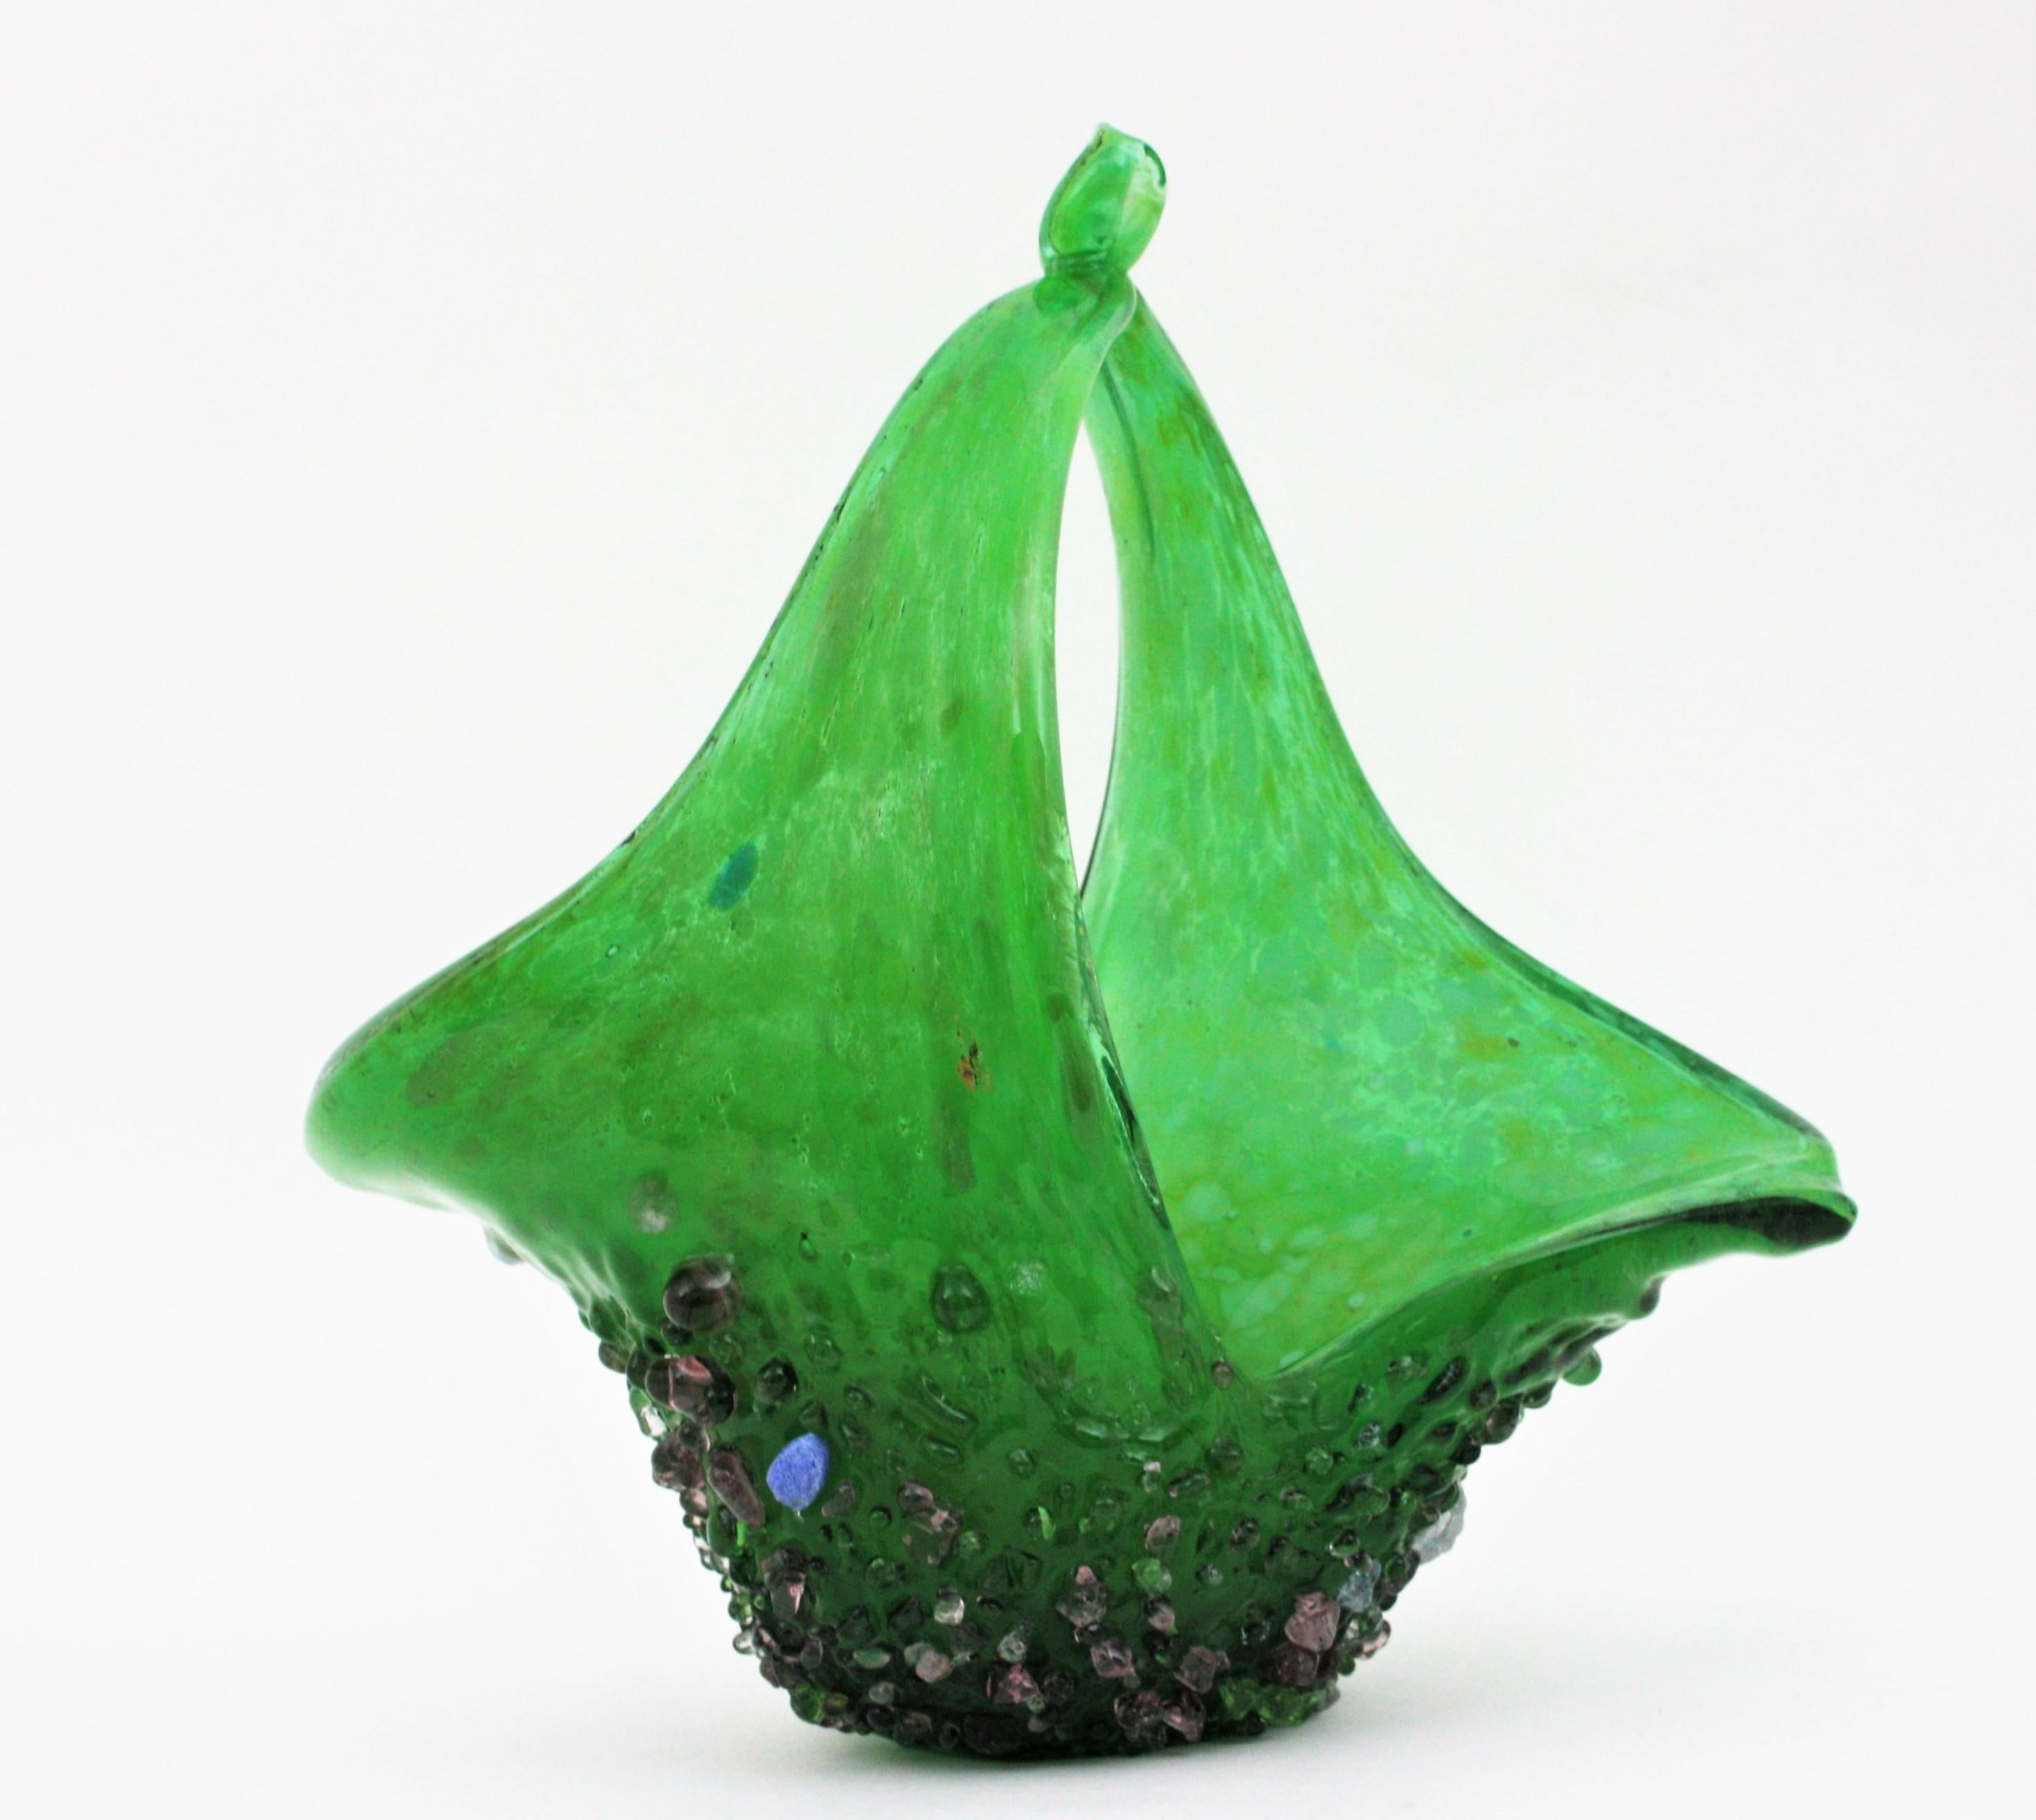 Murano Art Glass Basket Centerpiece Vase. Italy, 1950s.
An unique and exceptional Murano art glass centerpiece in shades of green with applied multicolor glass drops. 
Finely executed in handblown glass with murrine decorations thorough. At the